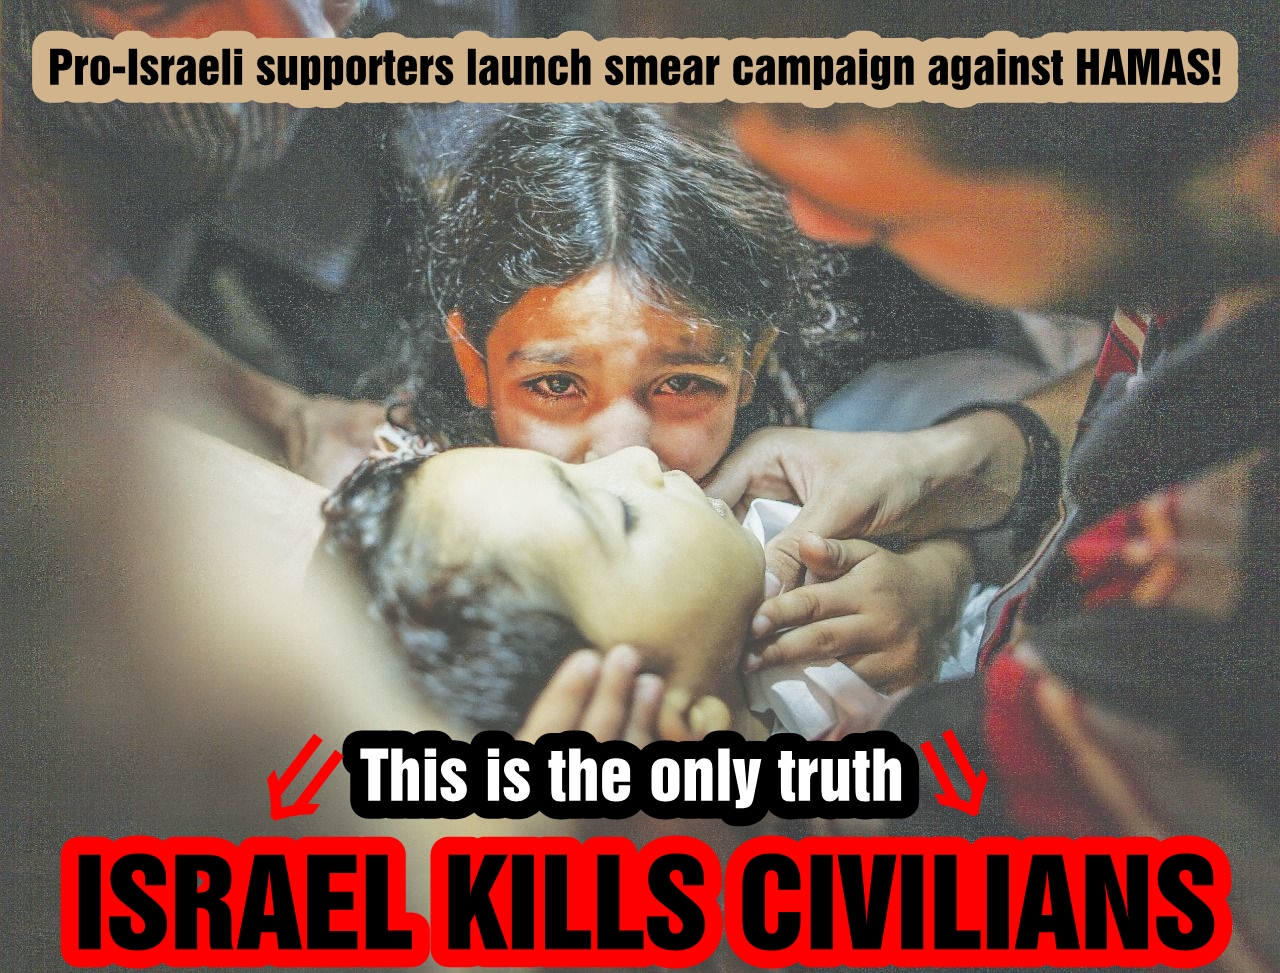 Pro-Israeli supporters launch smear campaign against HAMAS!